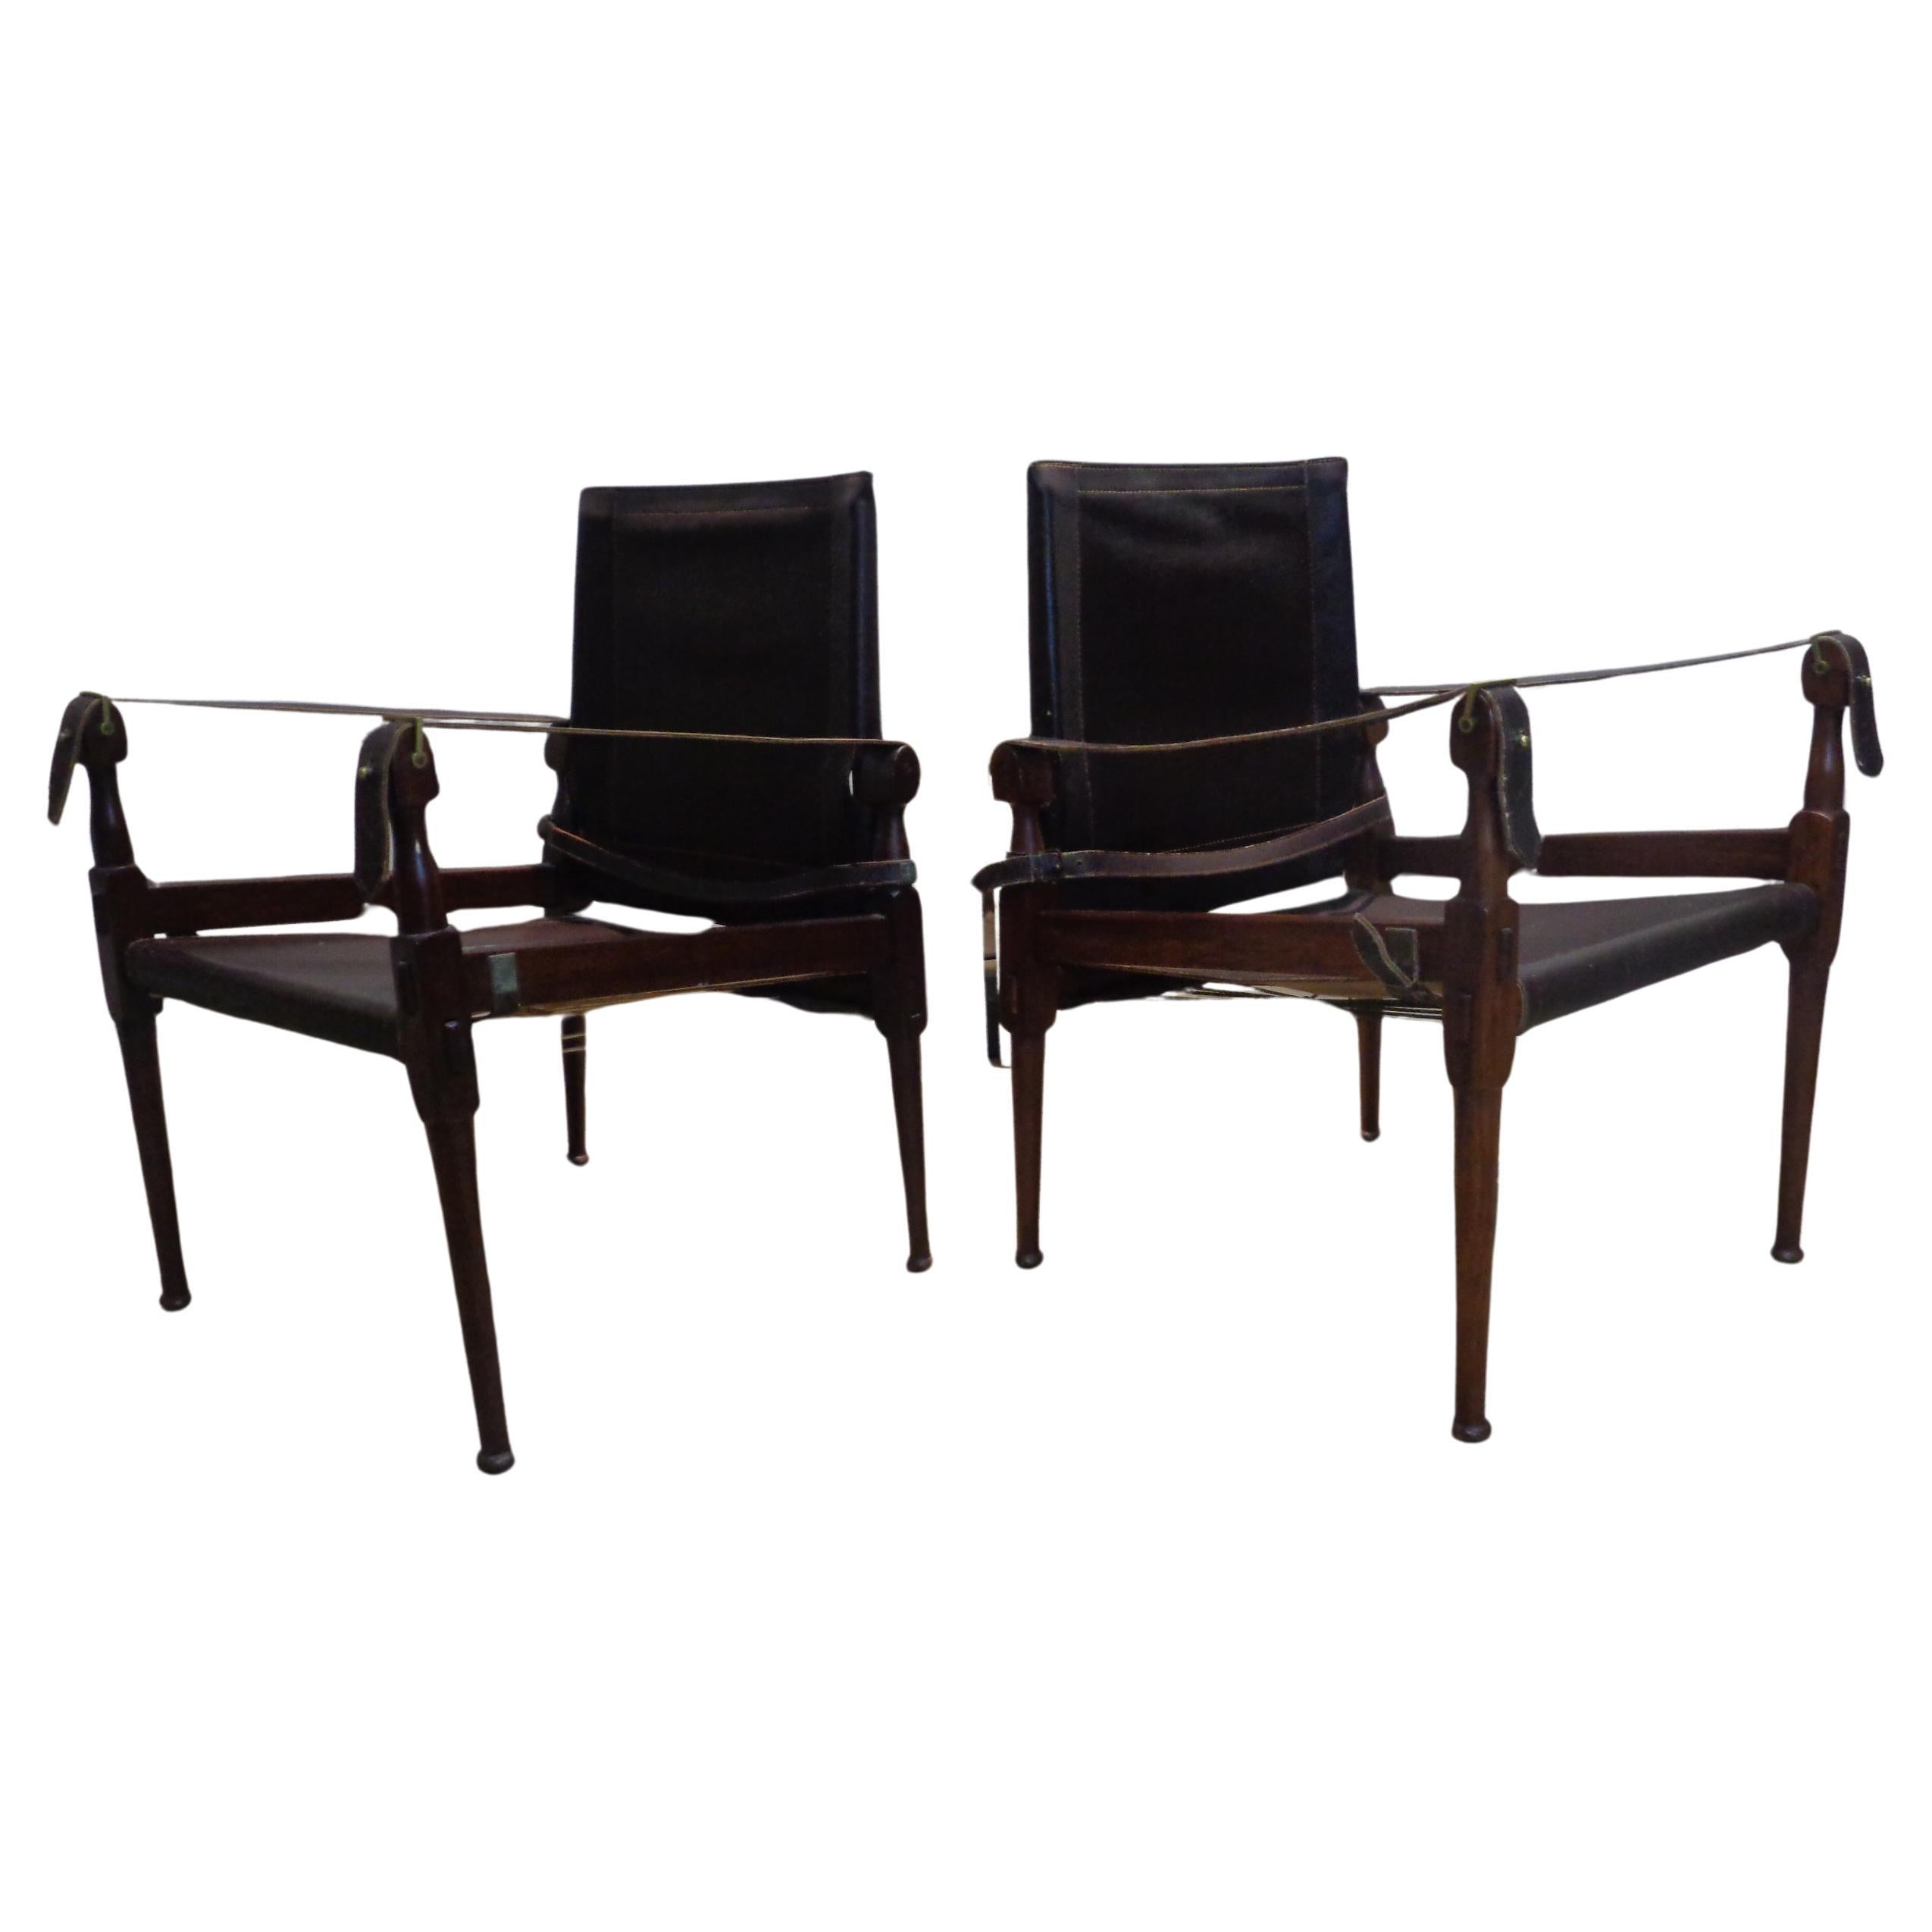  Campaign Style Safari Chairs, M. Hayat & Bros. 1960-1970 For Sale 3